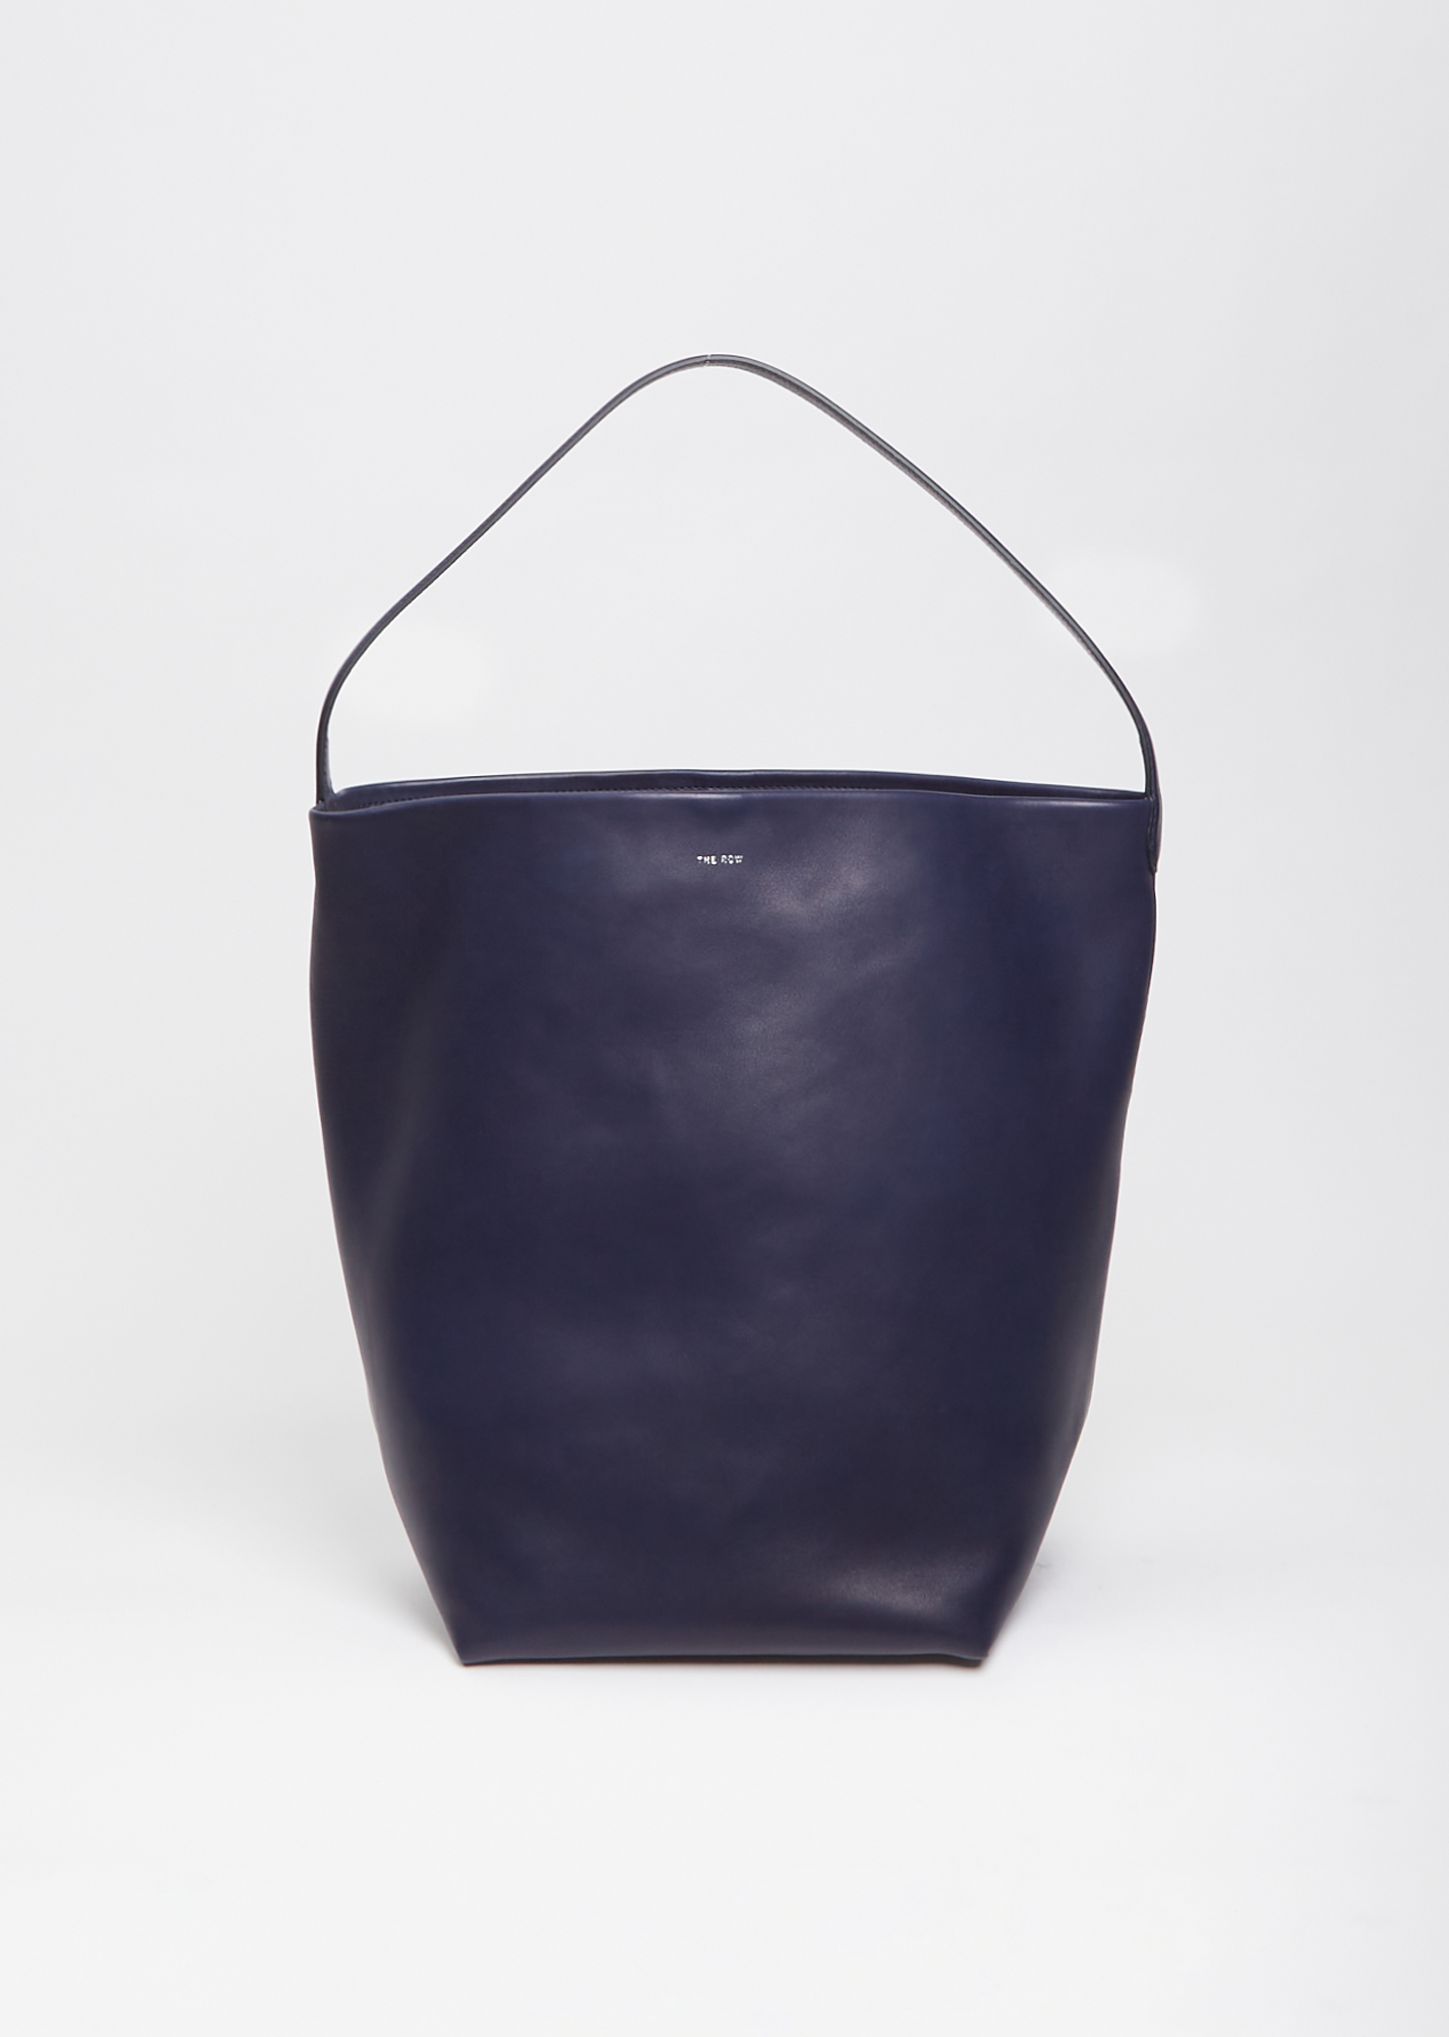 The Row Park Small Leather Tote in Blue